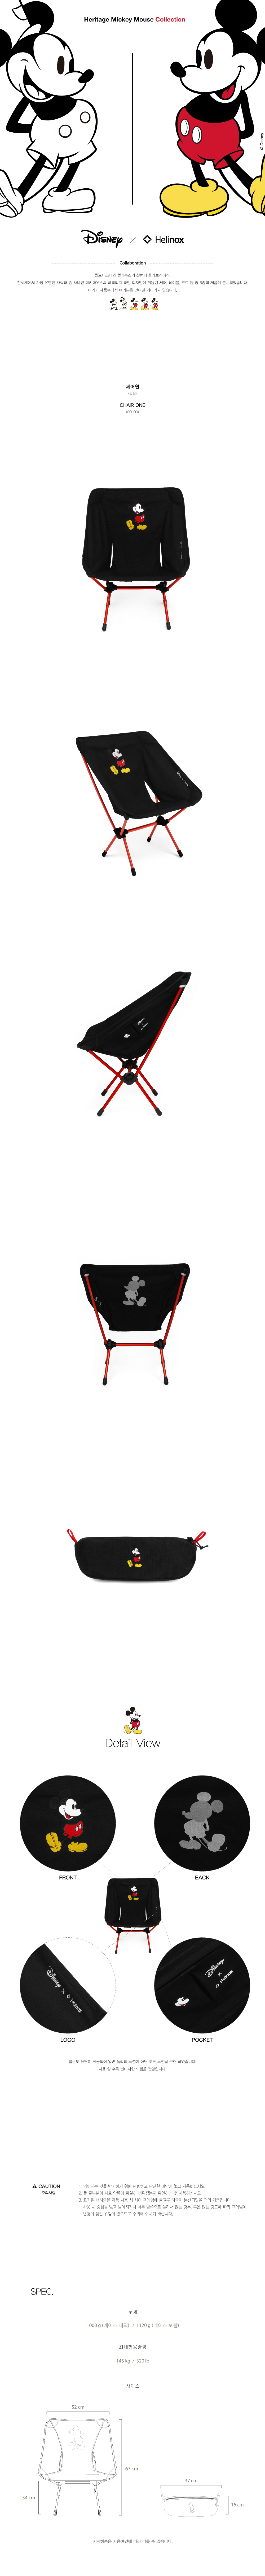 20171207-mickey-collaboration-chair-color.jpg